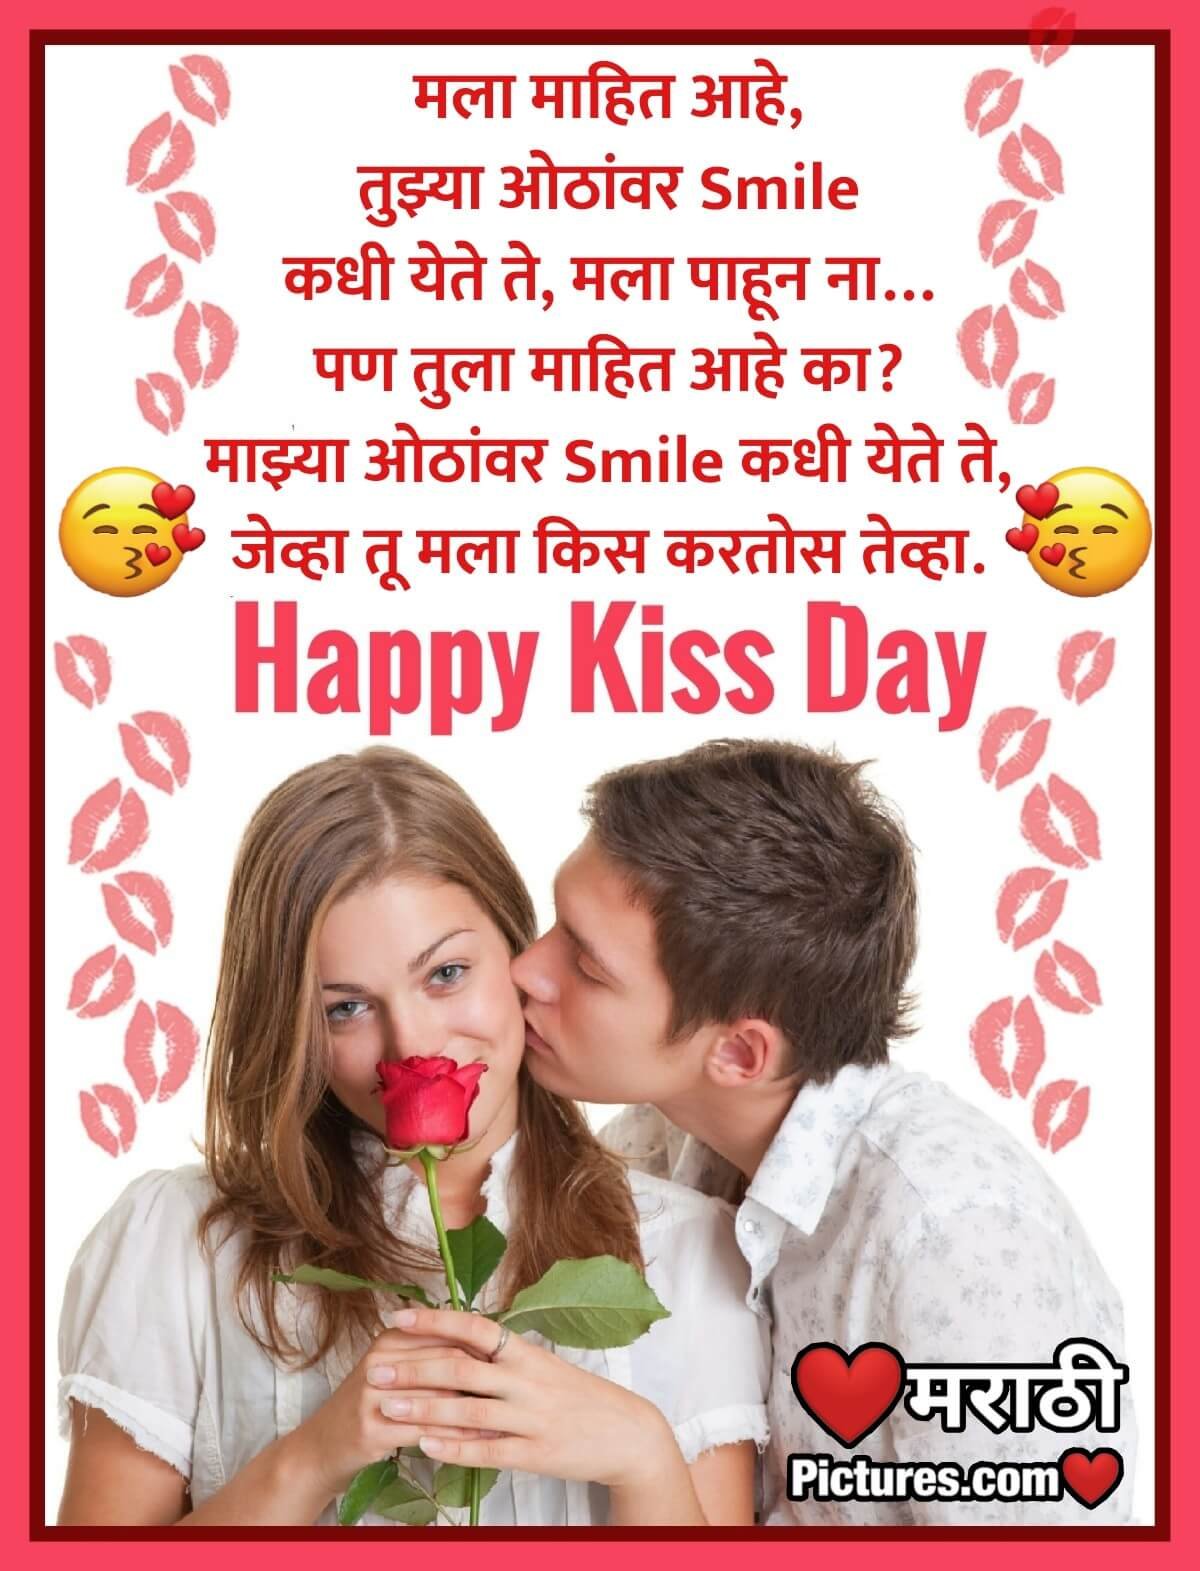 Happy Kiss Day In Marathi For Him